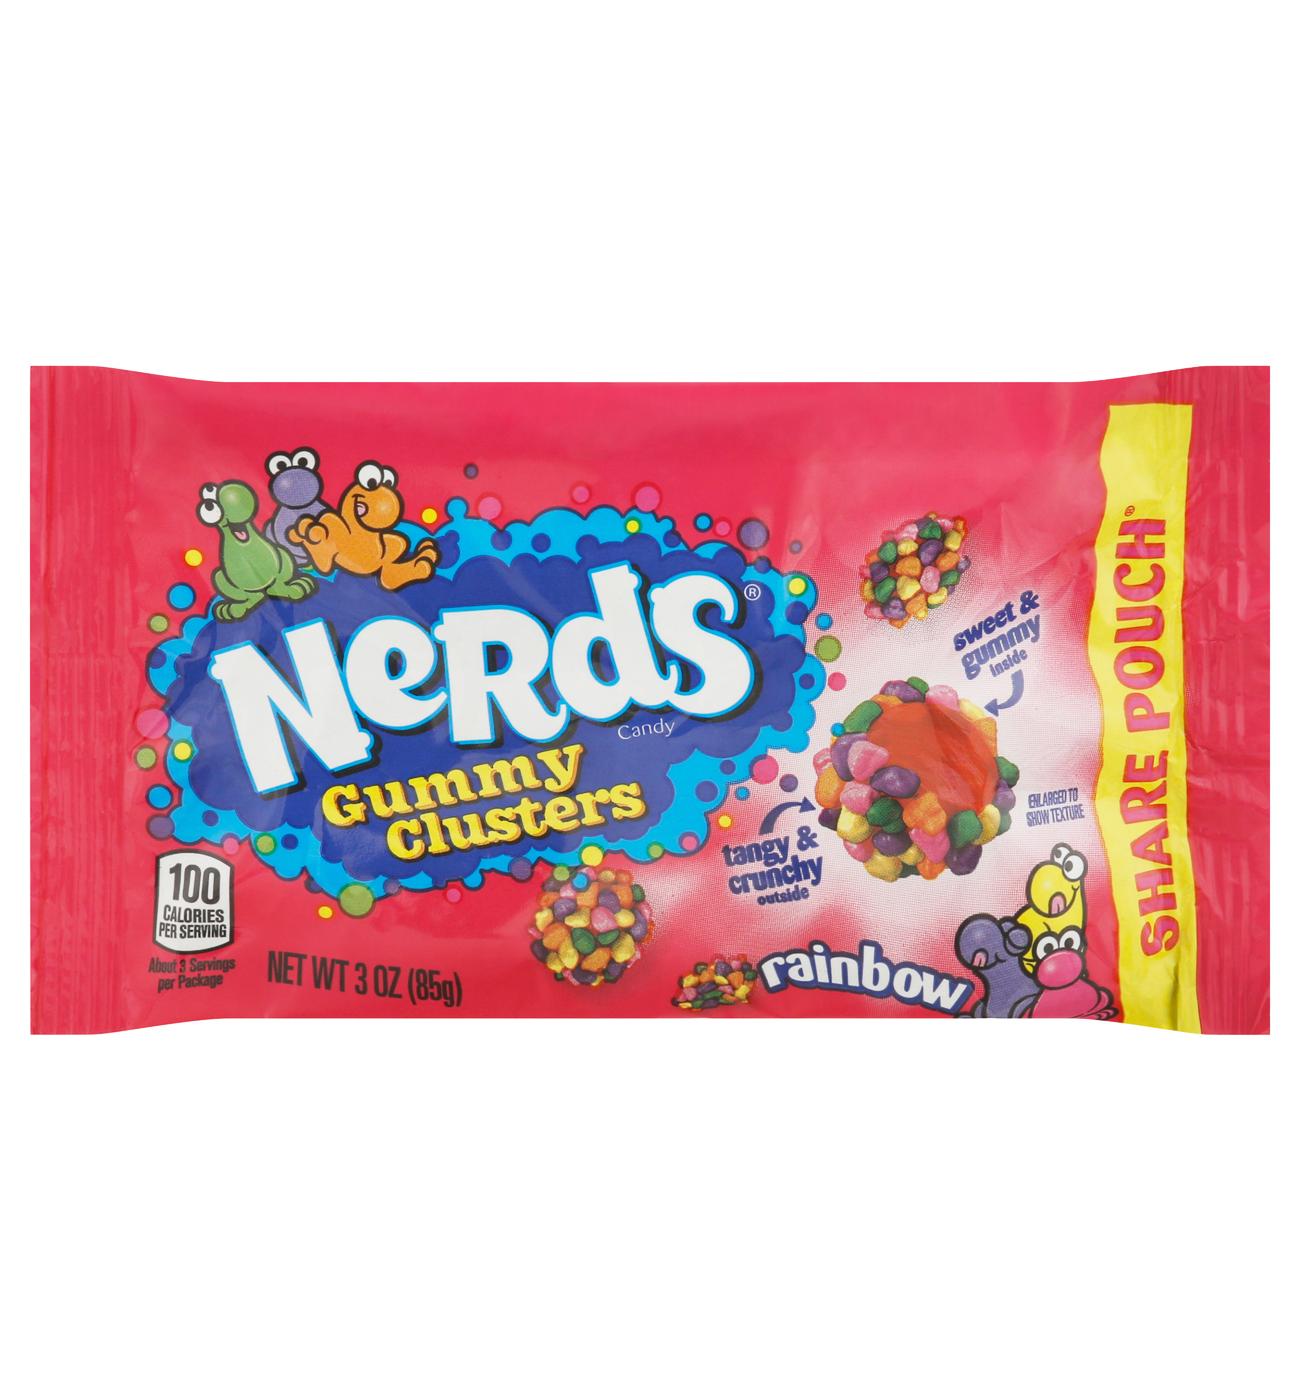 Nerds Rainbow Gummy Clusters Share Size Candy; image 1 of 2